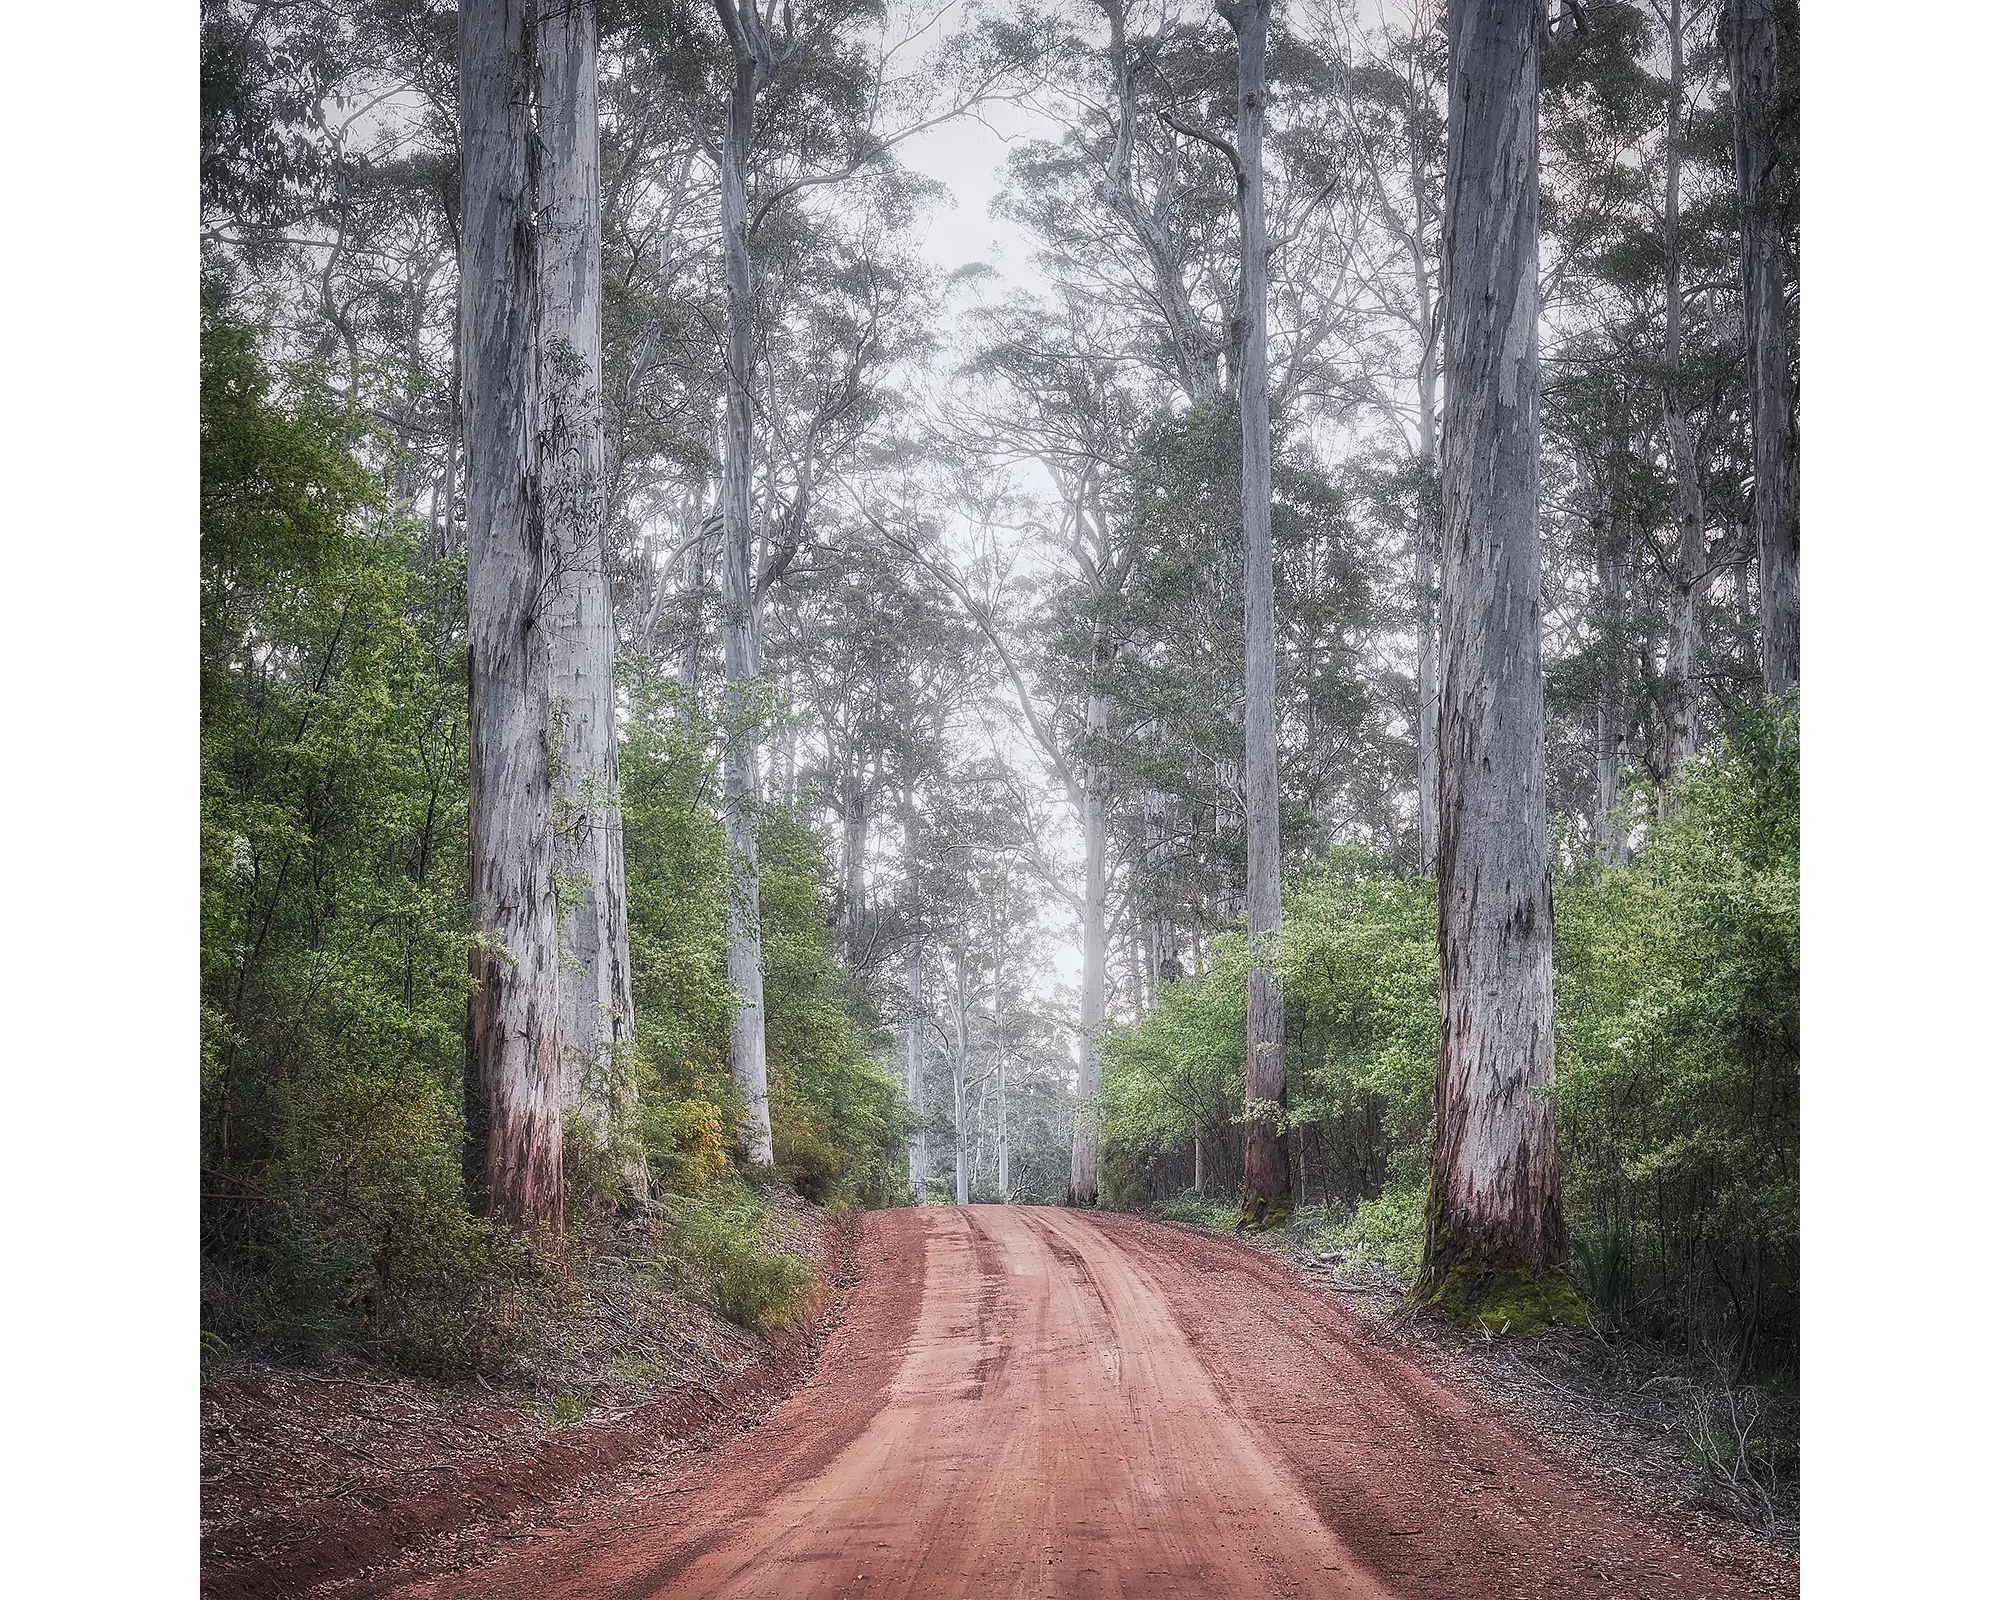 The Forest Beyond - Road through Karri forest, South West Western Australia.